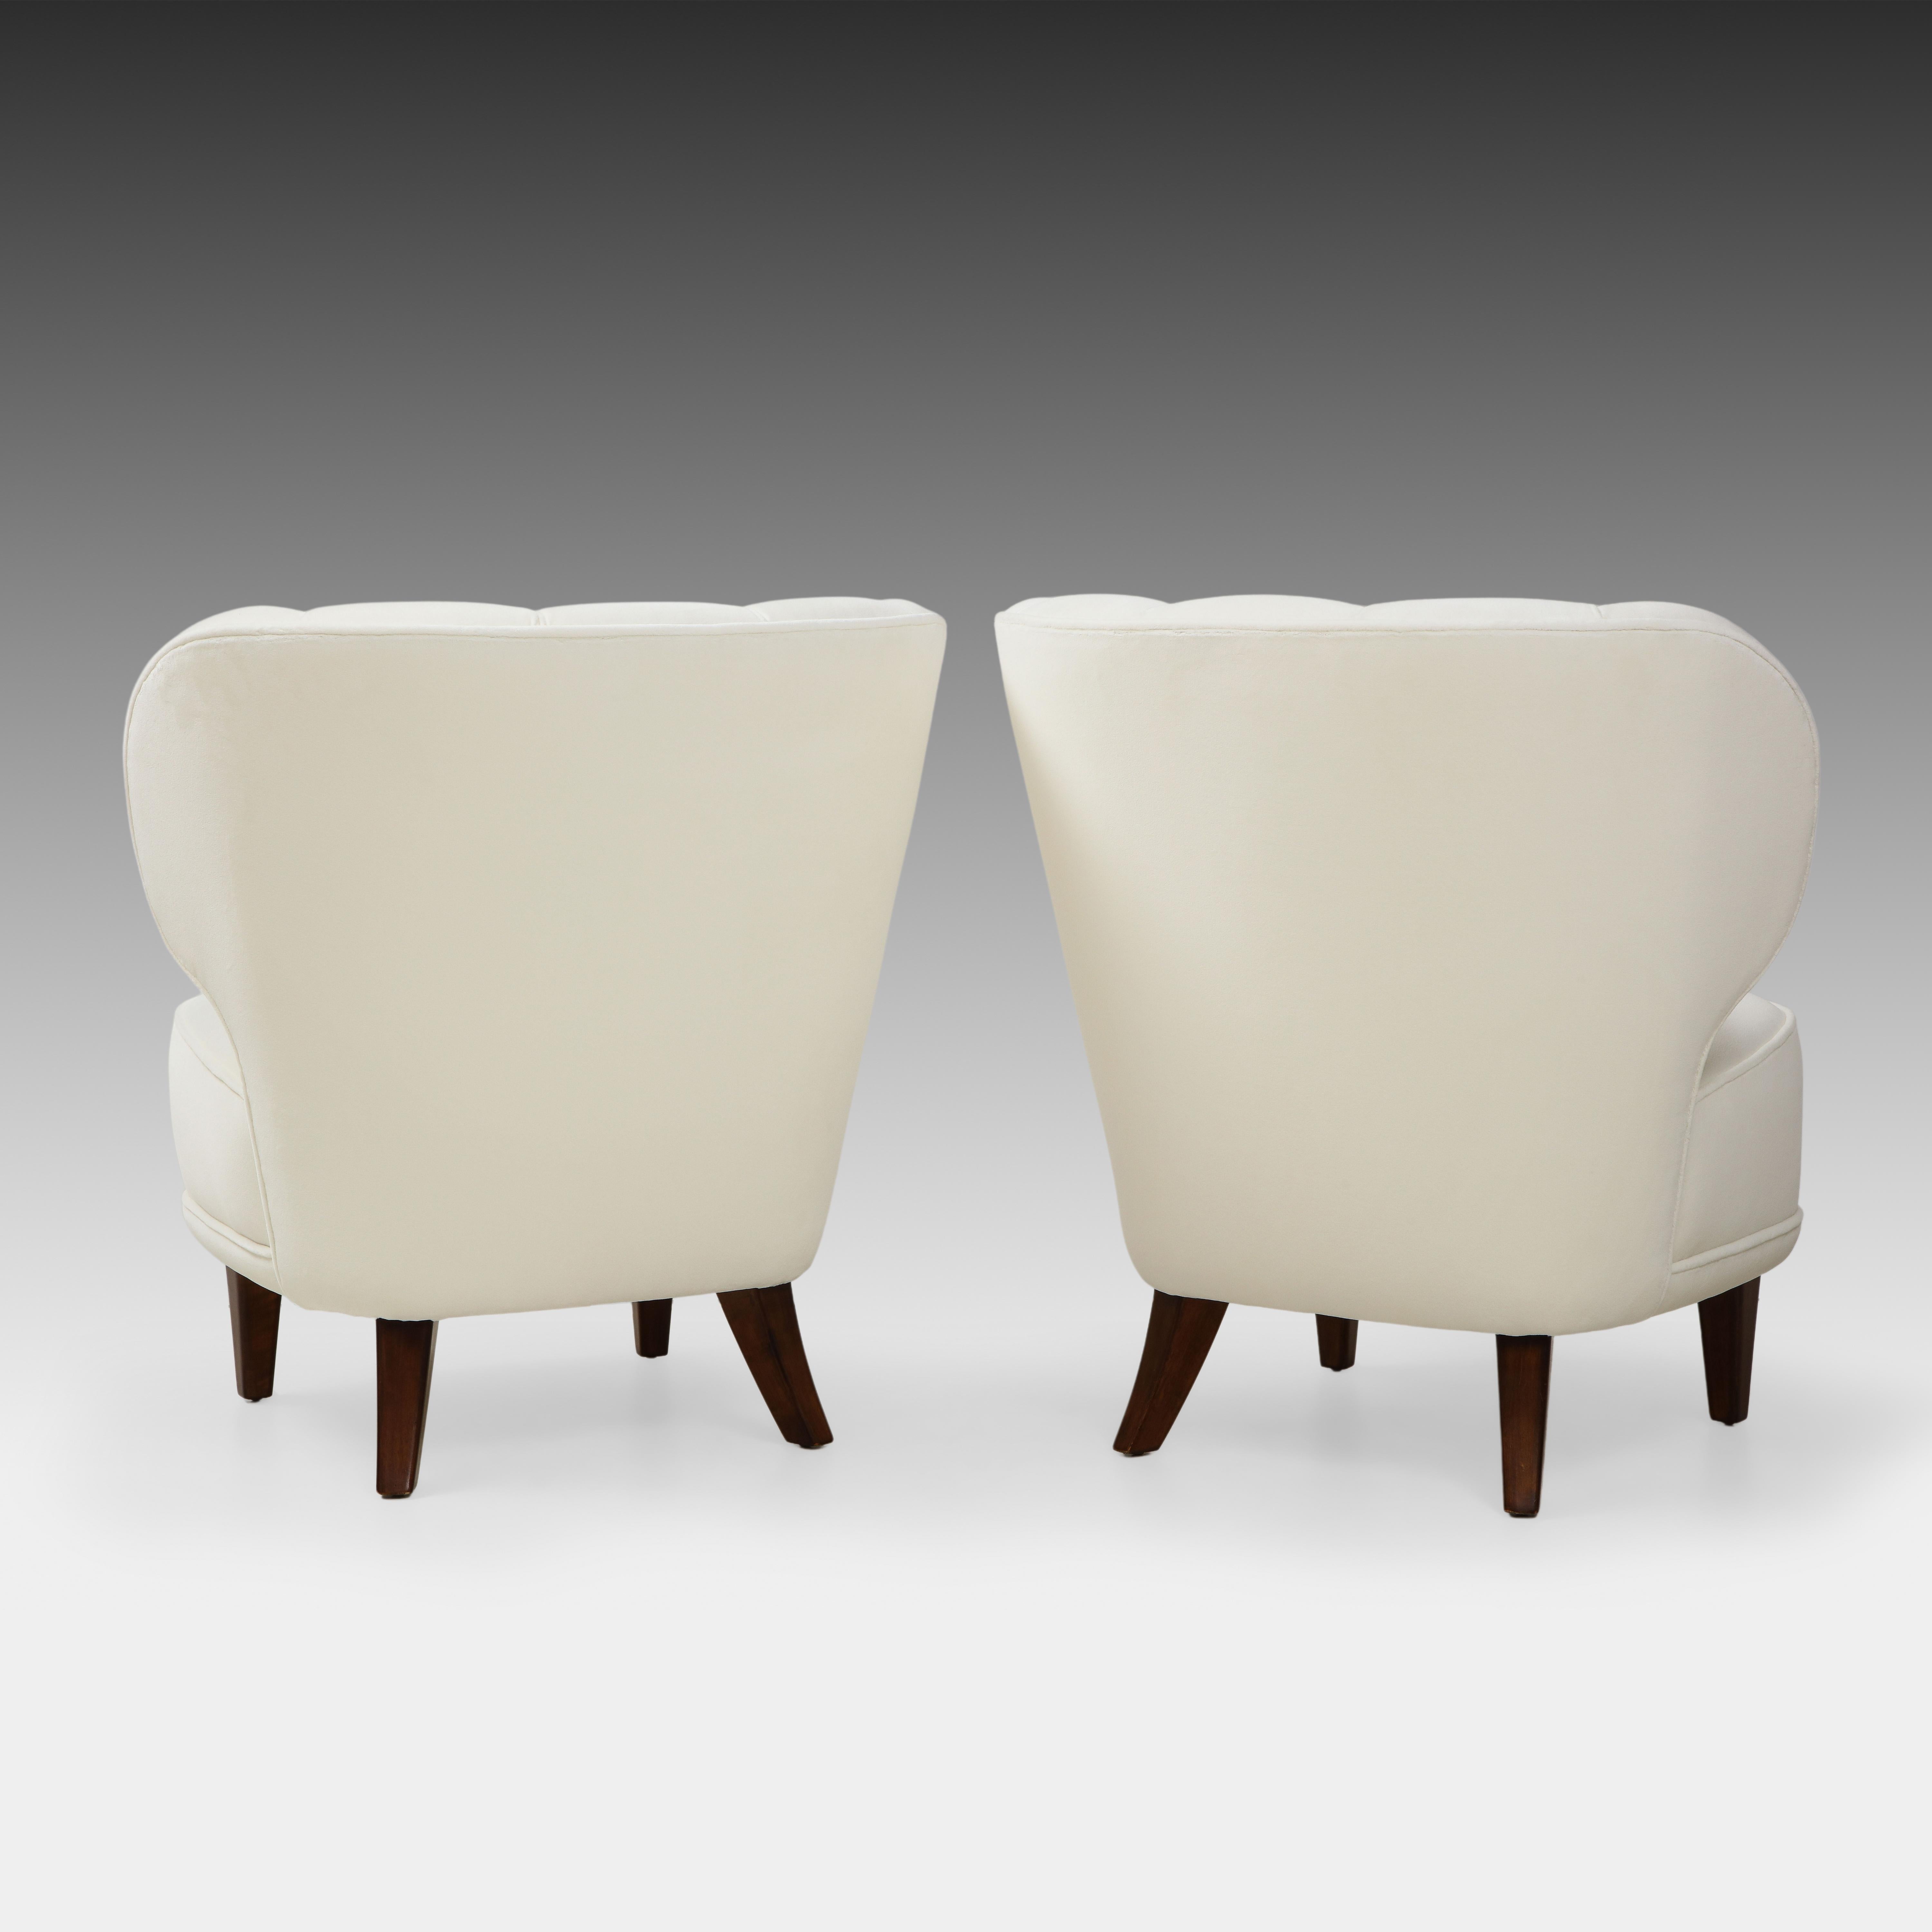 Carl-Johan Boman Rare Pair of Ivory Velvet Tufted Easy Chairs, Finland, 1940s In Good Condition For Sale In New York, NY